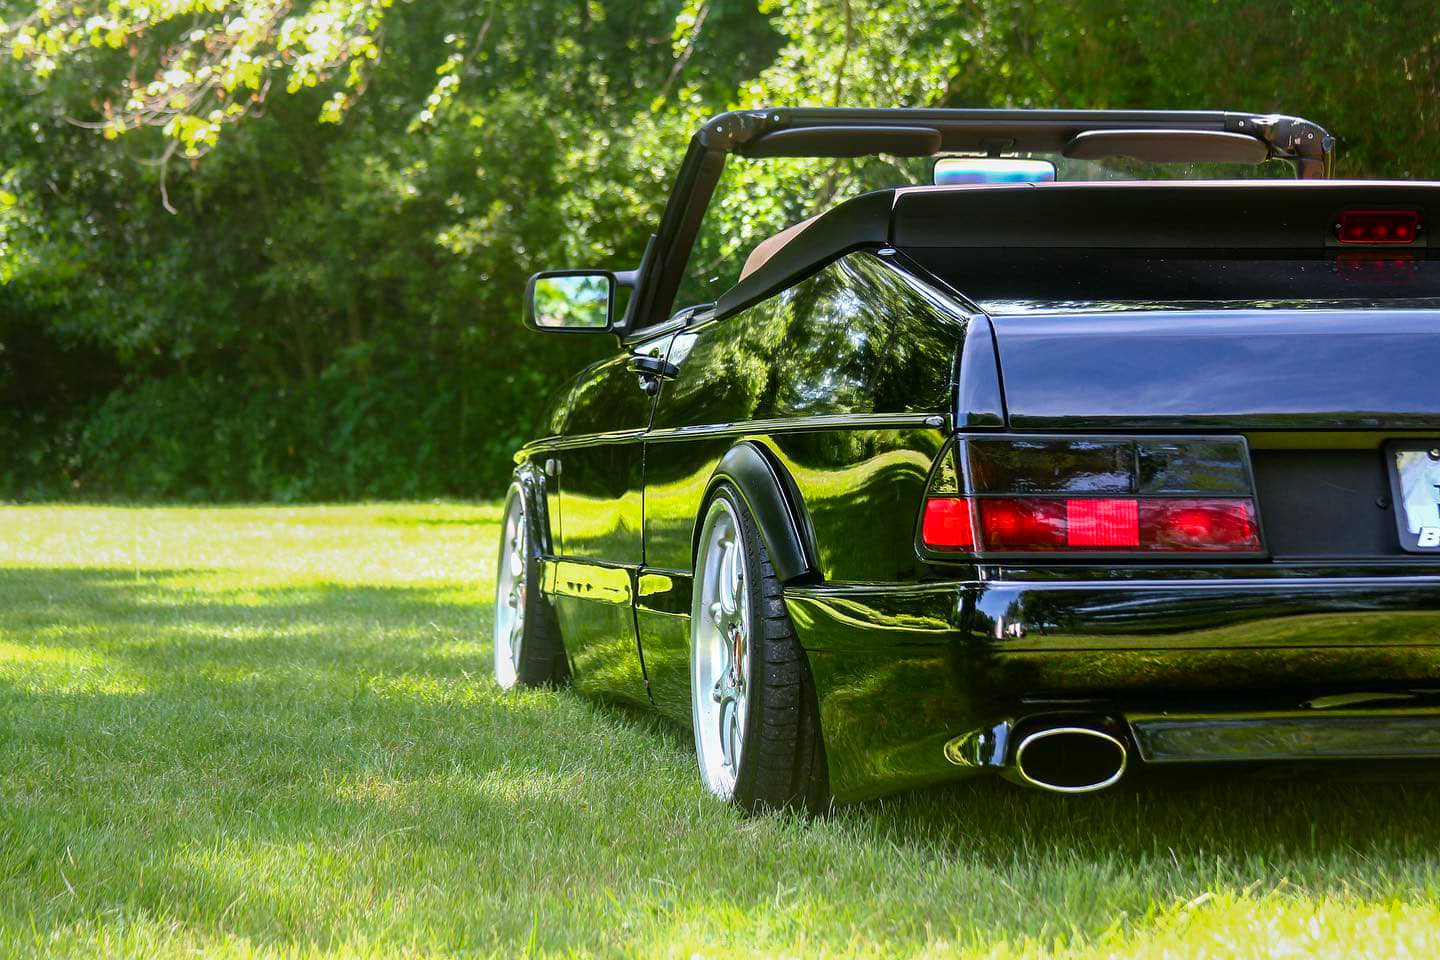 Black Saab 900 convertible with wide wheels